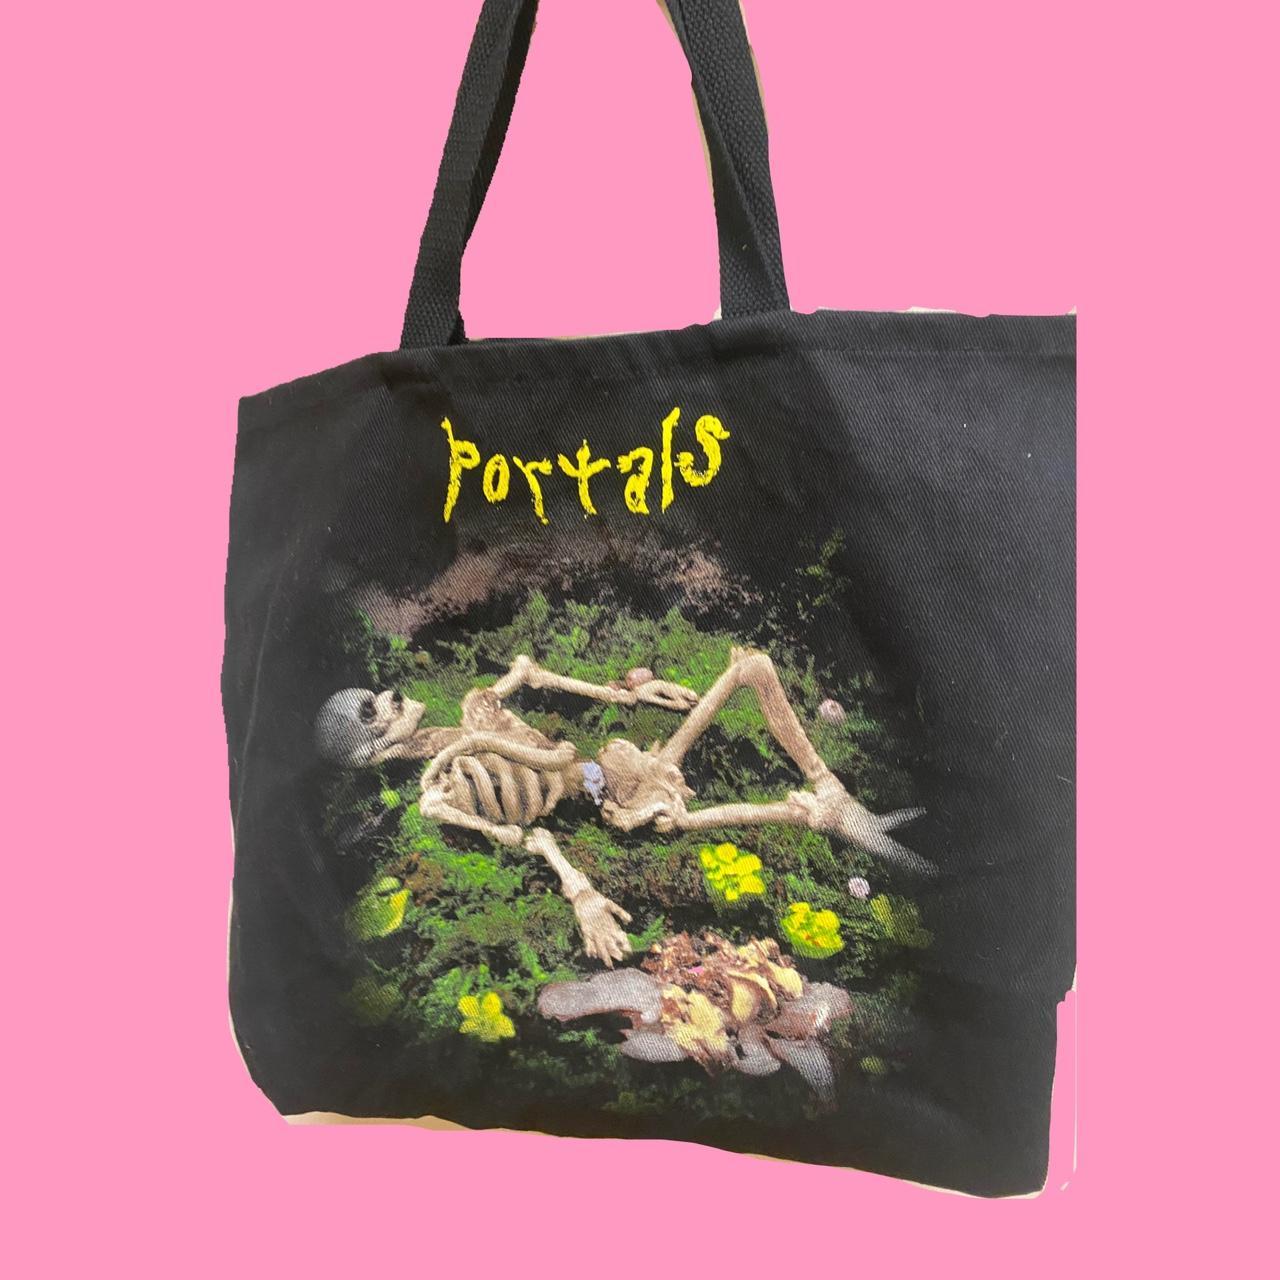 portals tour tote bag 🎀 used once or twice 🌟 love,... Depop